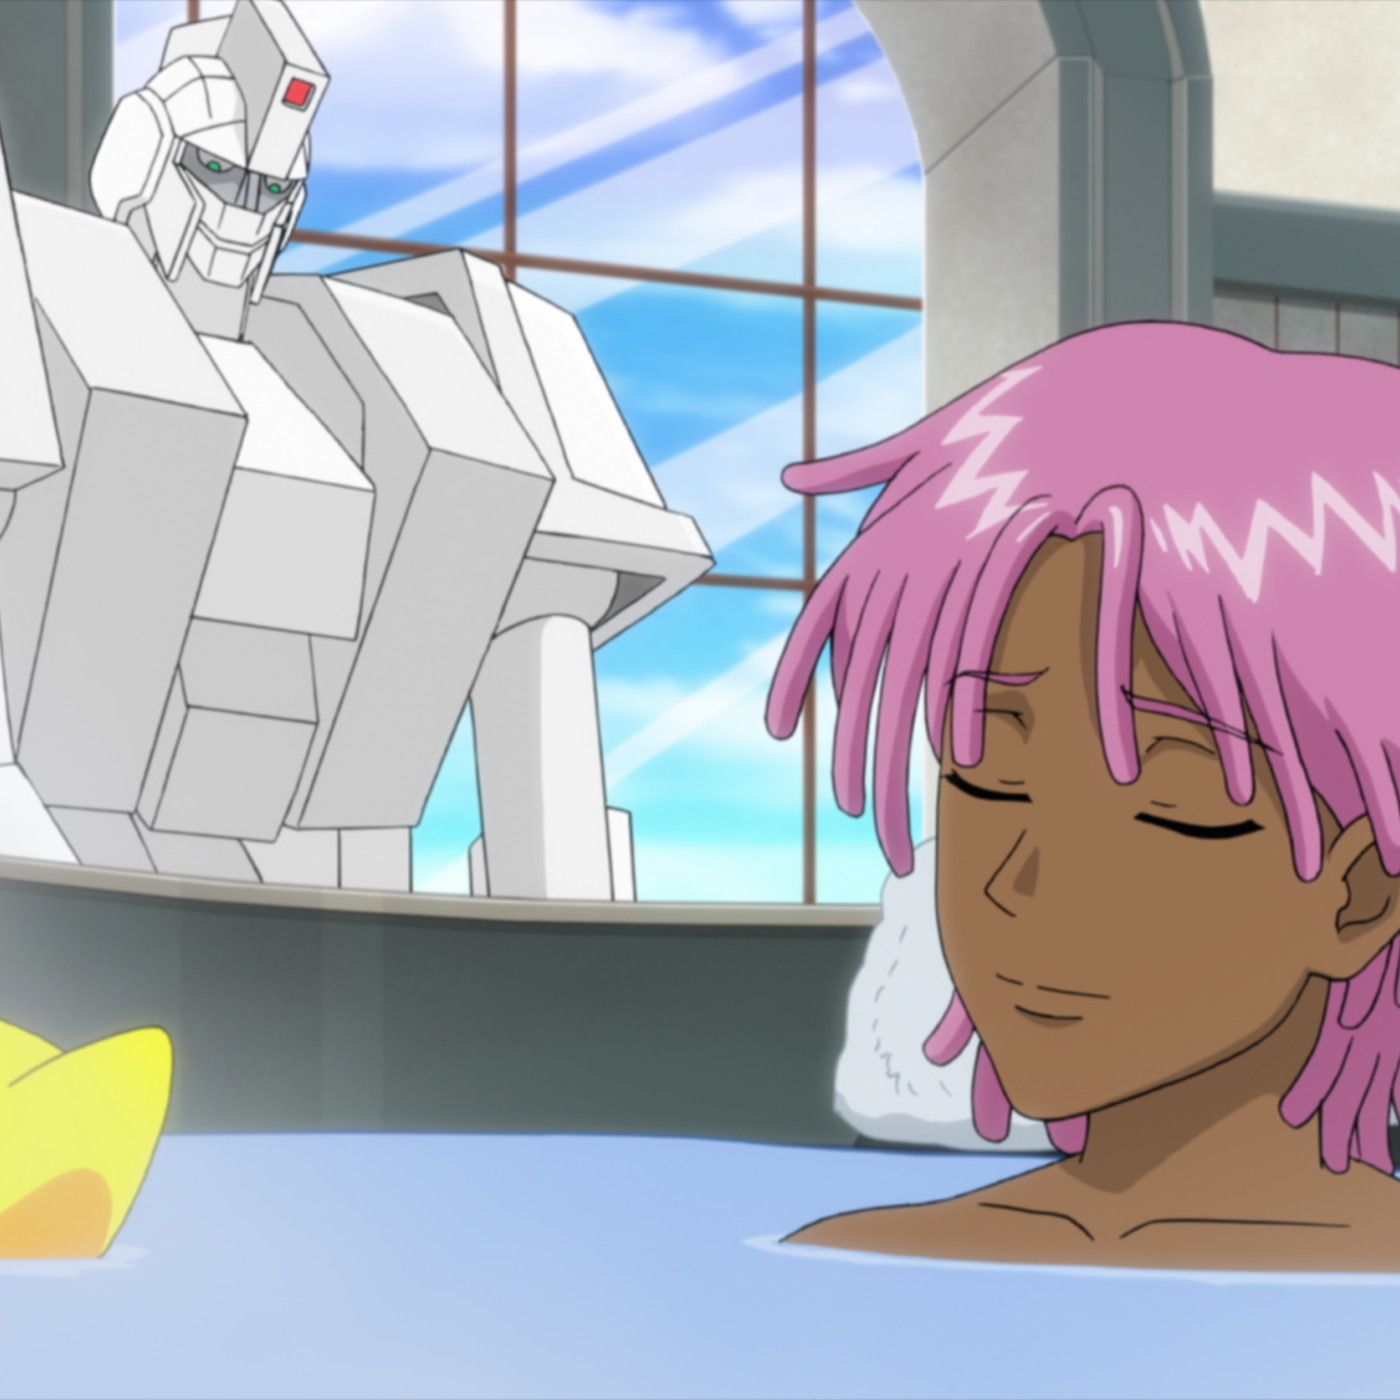 Netflix's Neo Yokio could have been awesome but it failed the execution